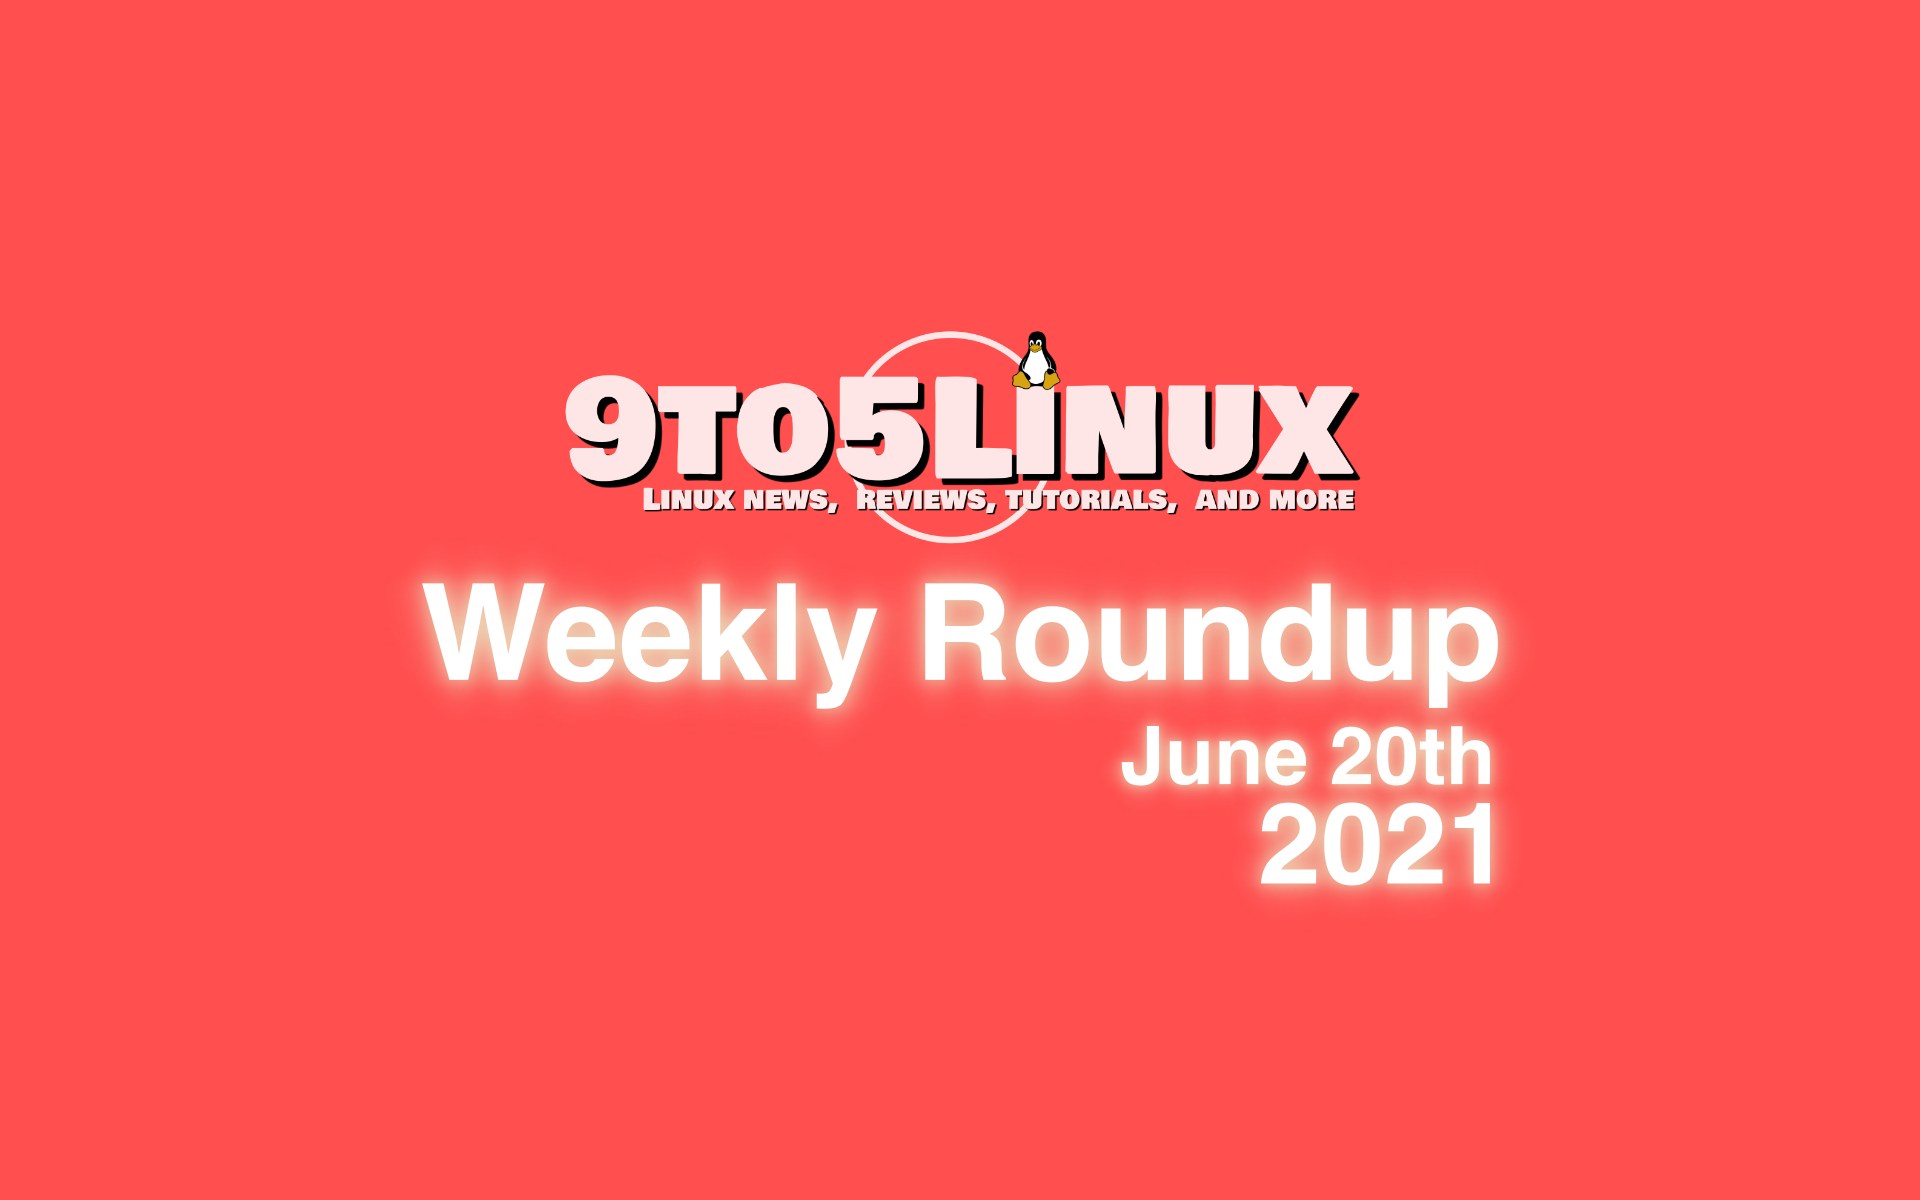 9to5Linux Weekly Roundup: June 20th, 2021